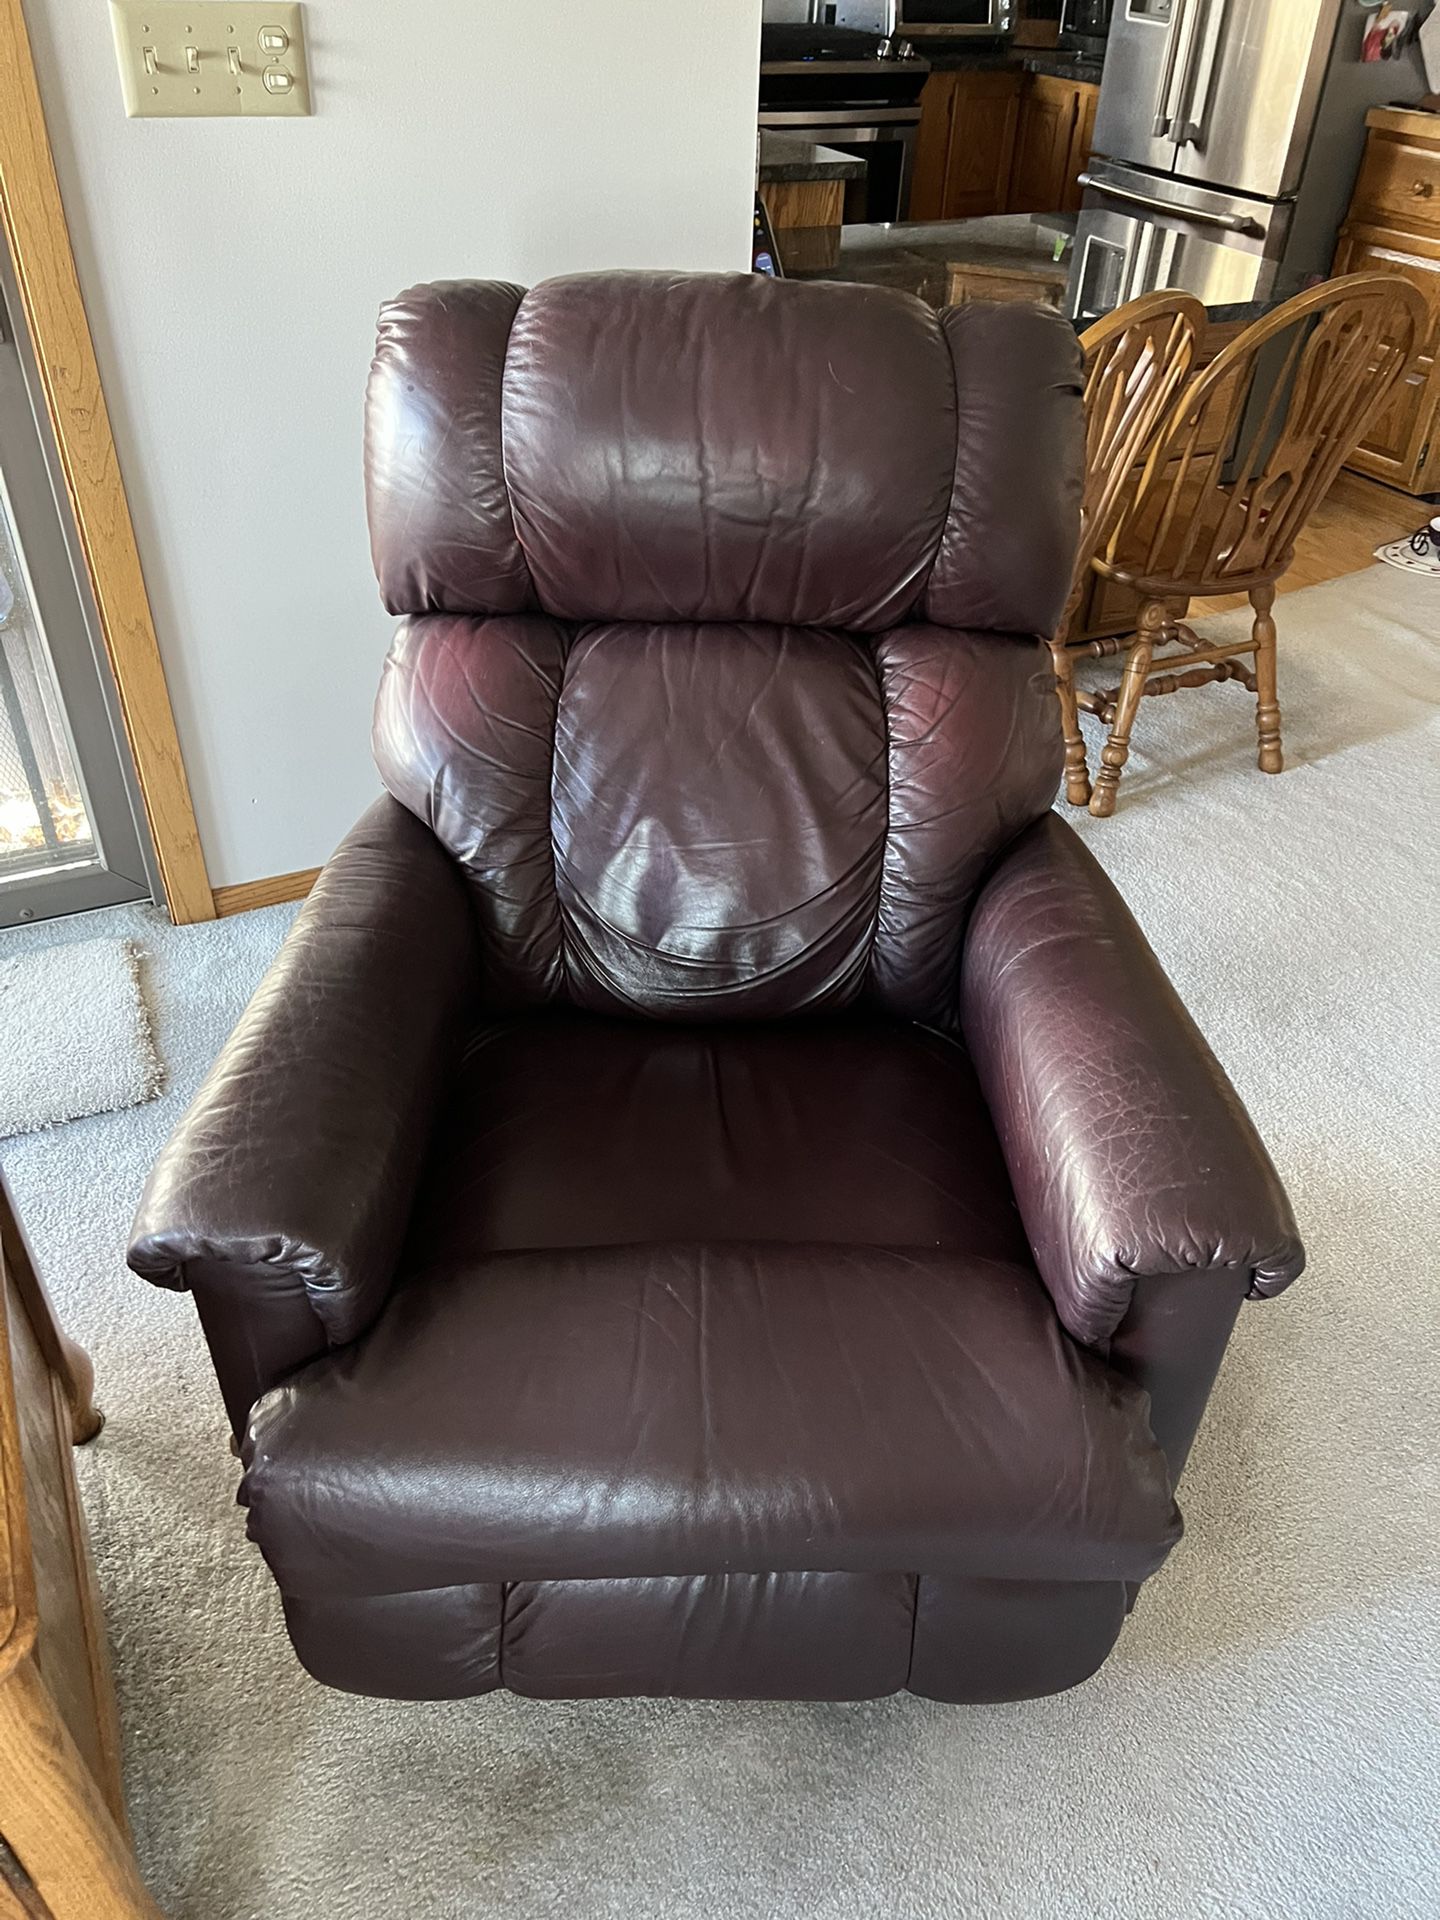 Recliners  Both In Excellent Condition  Leather  I am  moving  Reducing  Price 200$ for Both Original  Price Was 4000$  we bought 